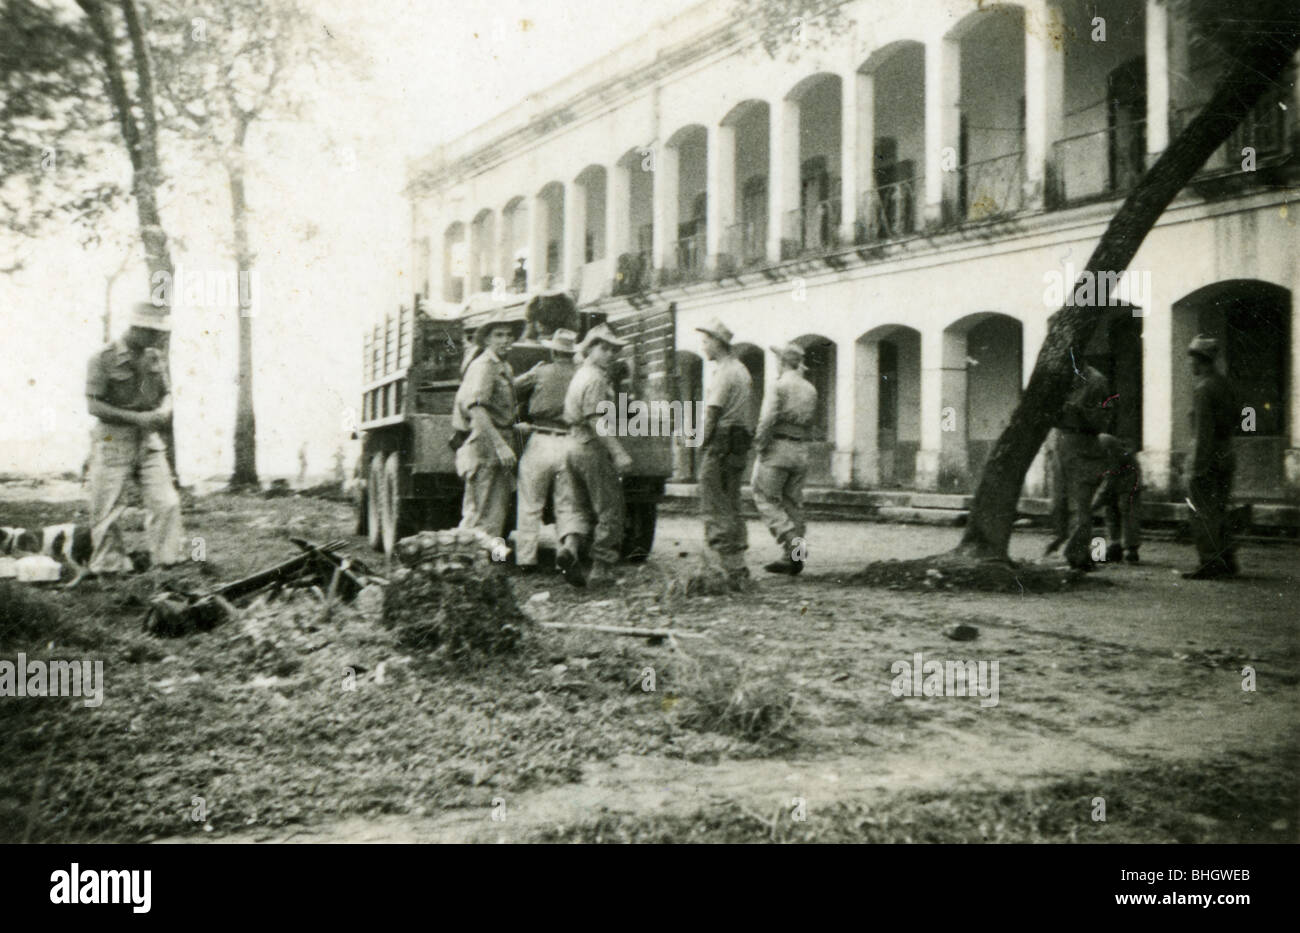 Members of the French Foreign legion unload a truck near a colonial style building. architecture. horizontal black and white Stock Photo